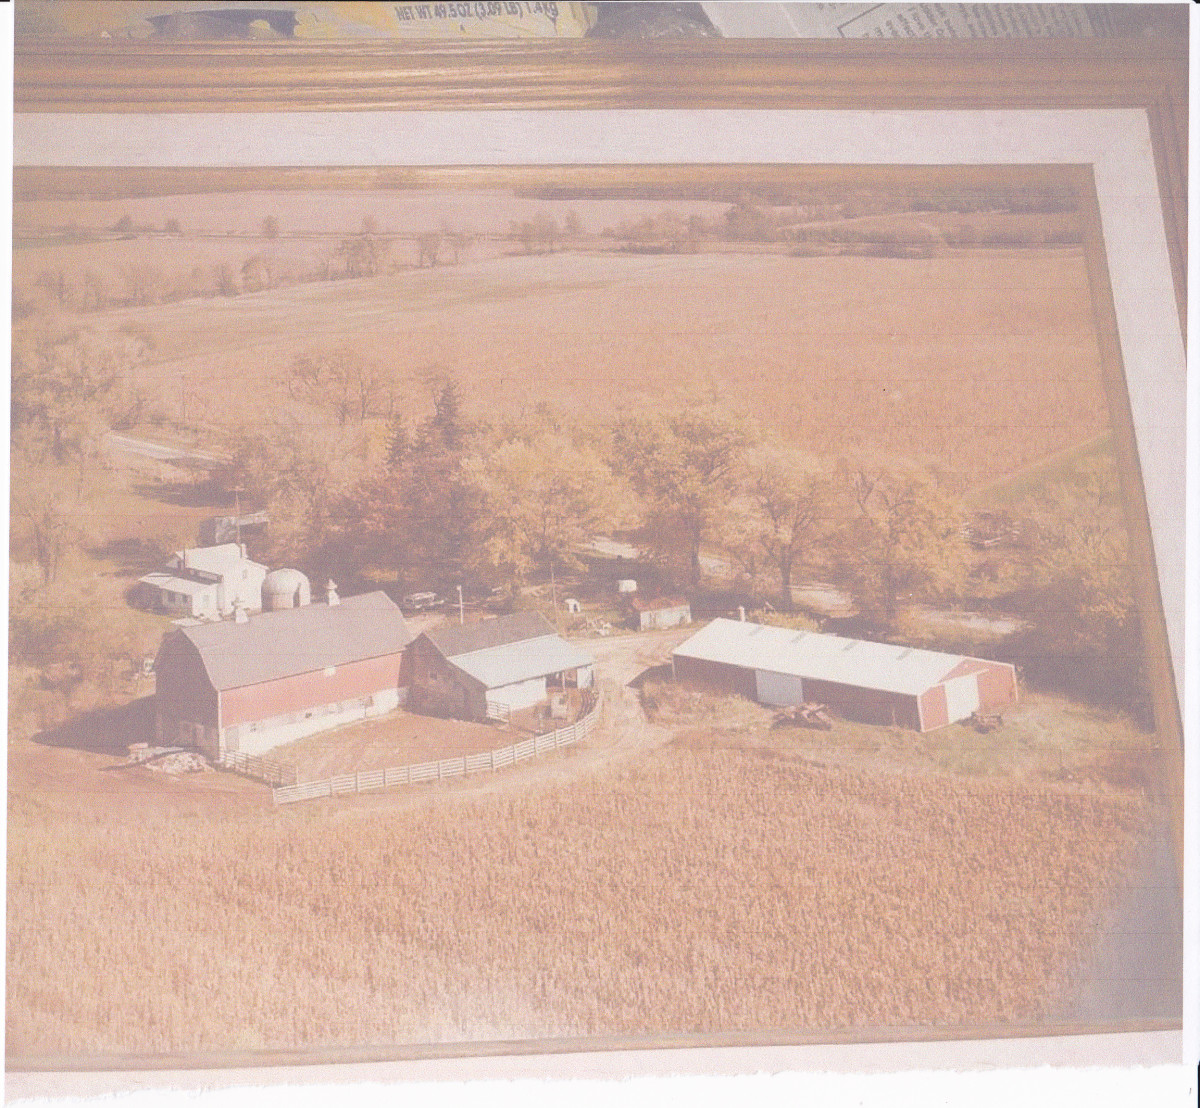 Memories of Farming With Dad: Those 35 Acres Across the Road